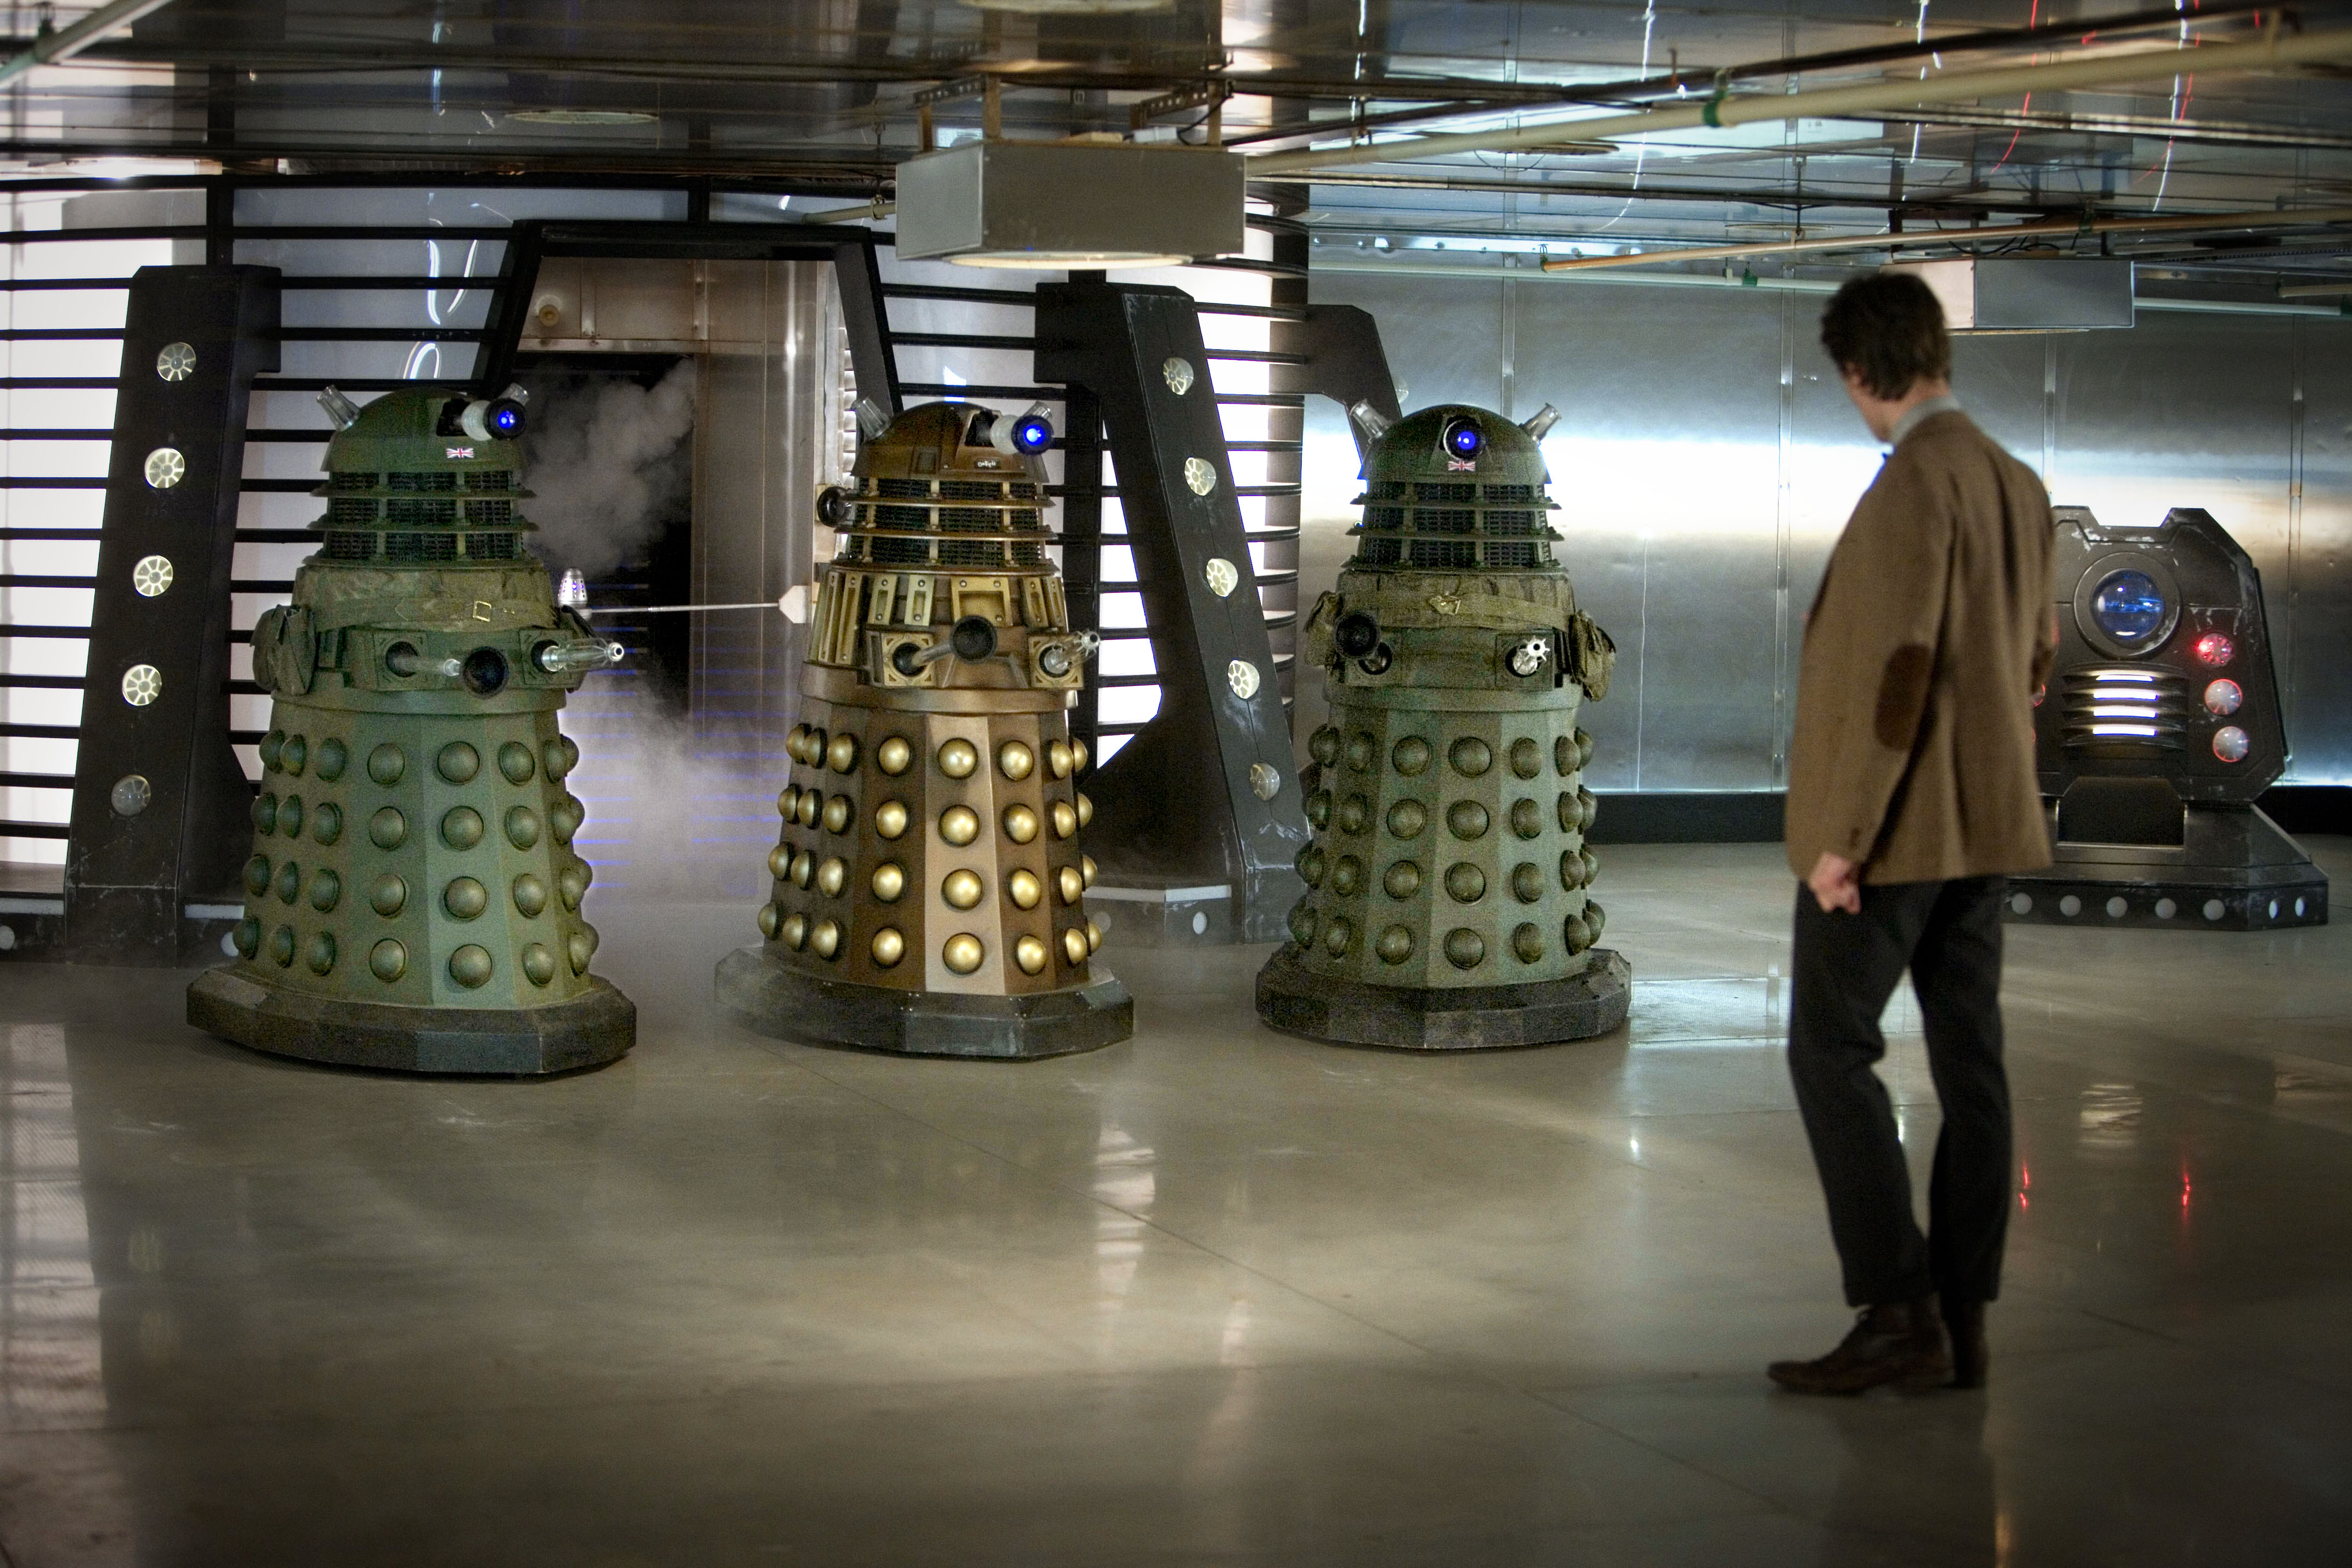 NSD2 (left), NSD5 and NSD4 together on the Dalek Spacecraft